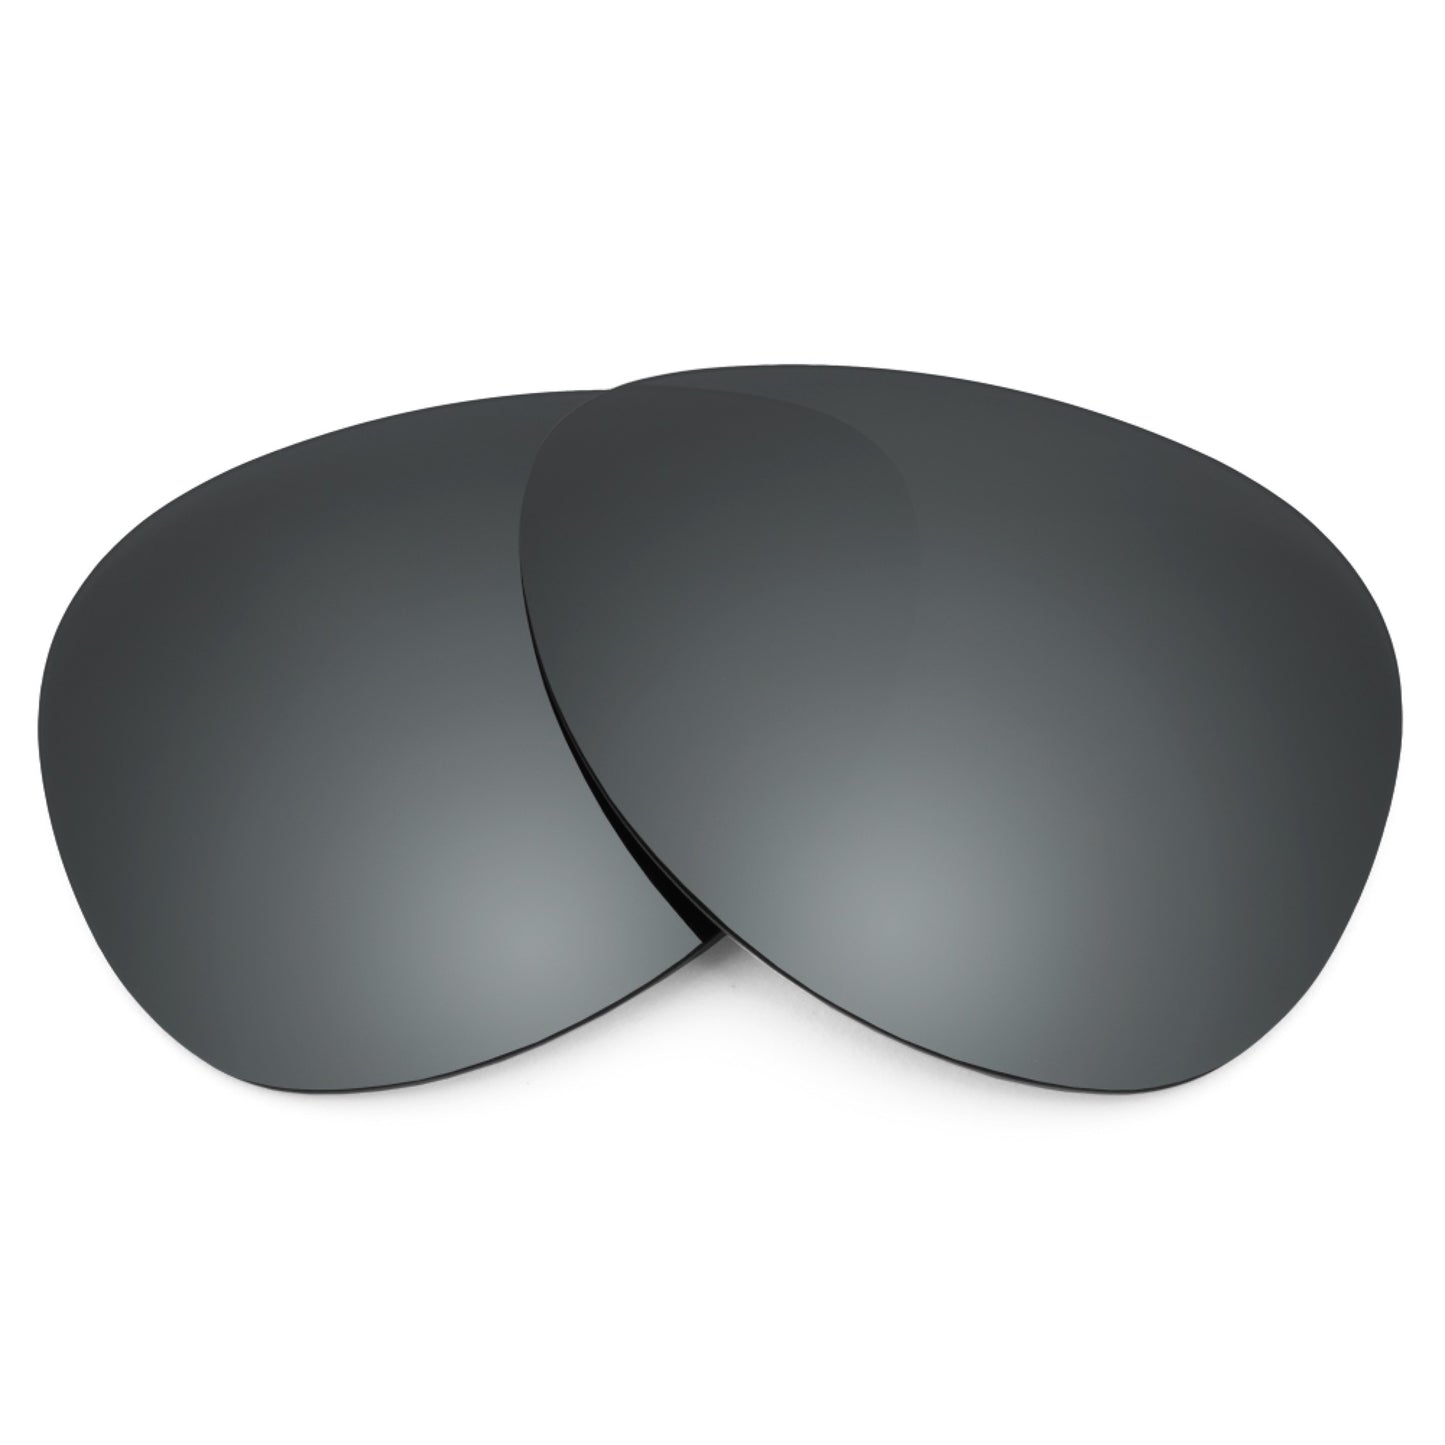 Revant replacement lenses for Ray-Ban Aviator RB3025 62mm Non-Polarized Black Chrome